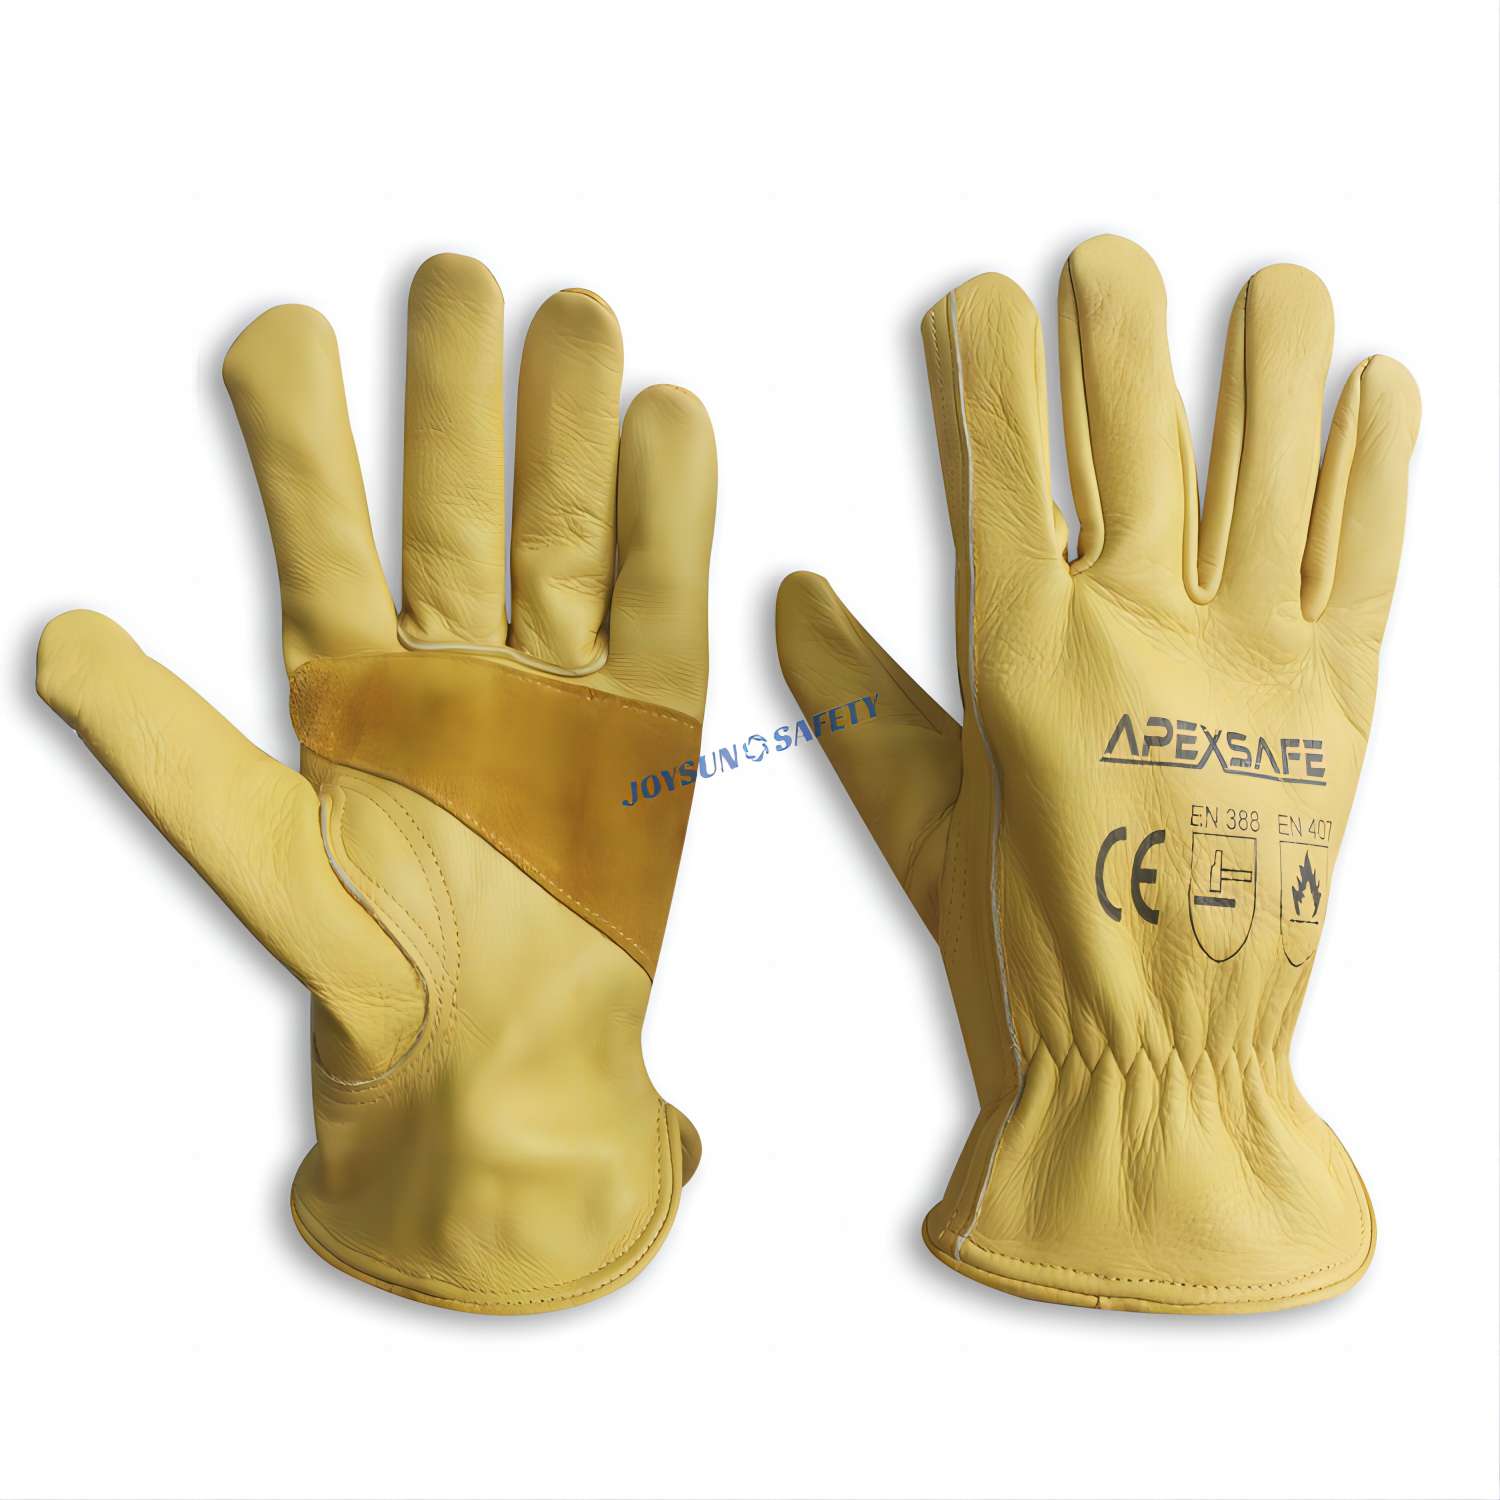 A pair of Joysun Safety DA01 yellow cowhide leather work gloves with reinforced palms for construction